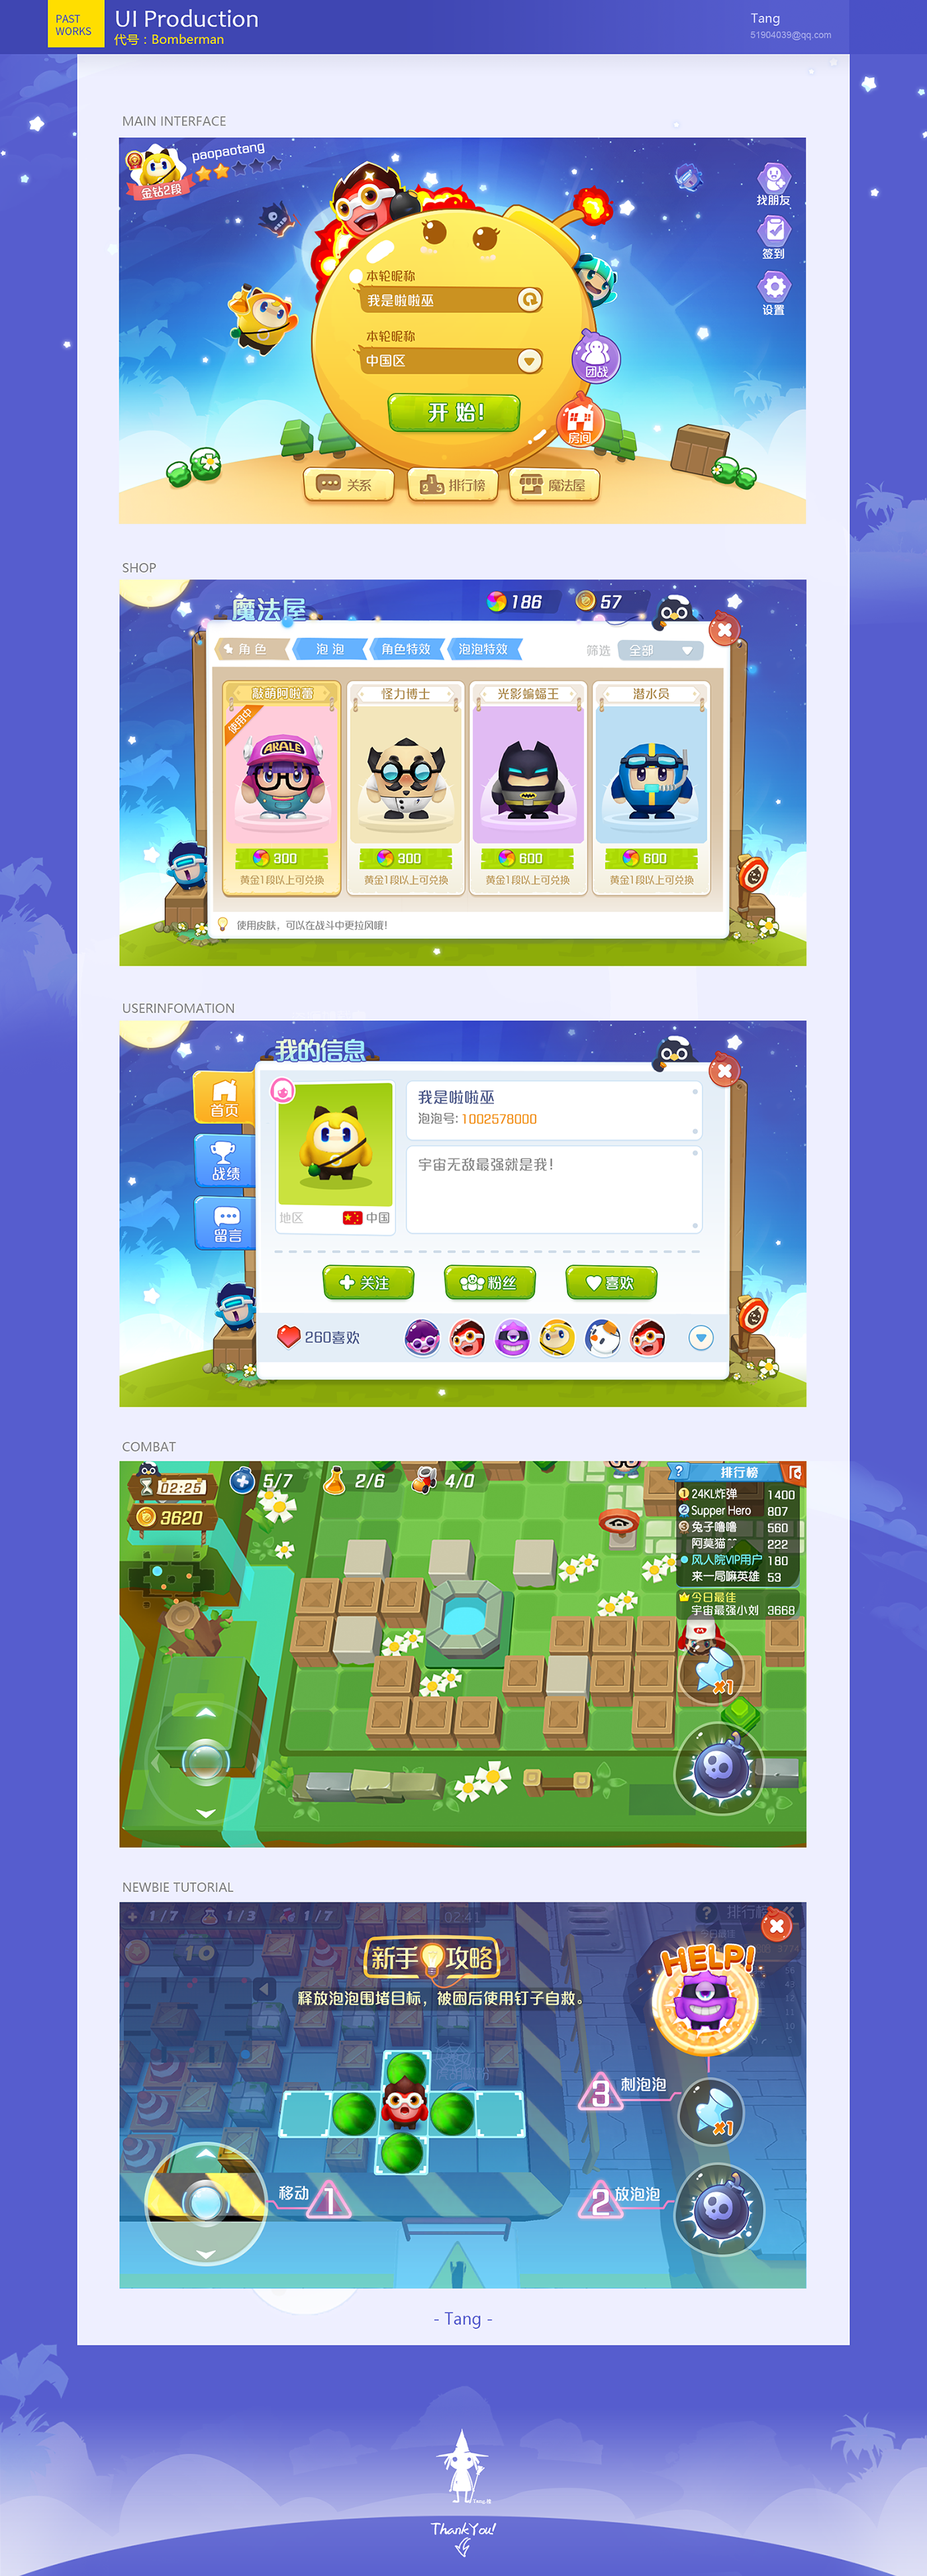 UI ux GUI game ui tang Q version ui design product design  Lovely style Interface